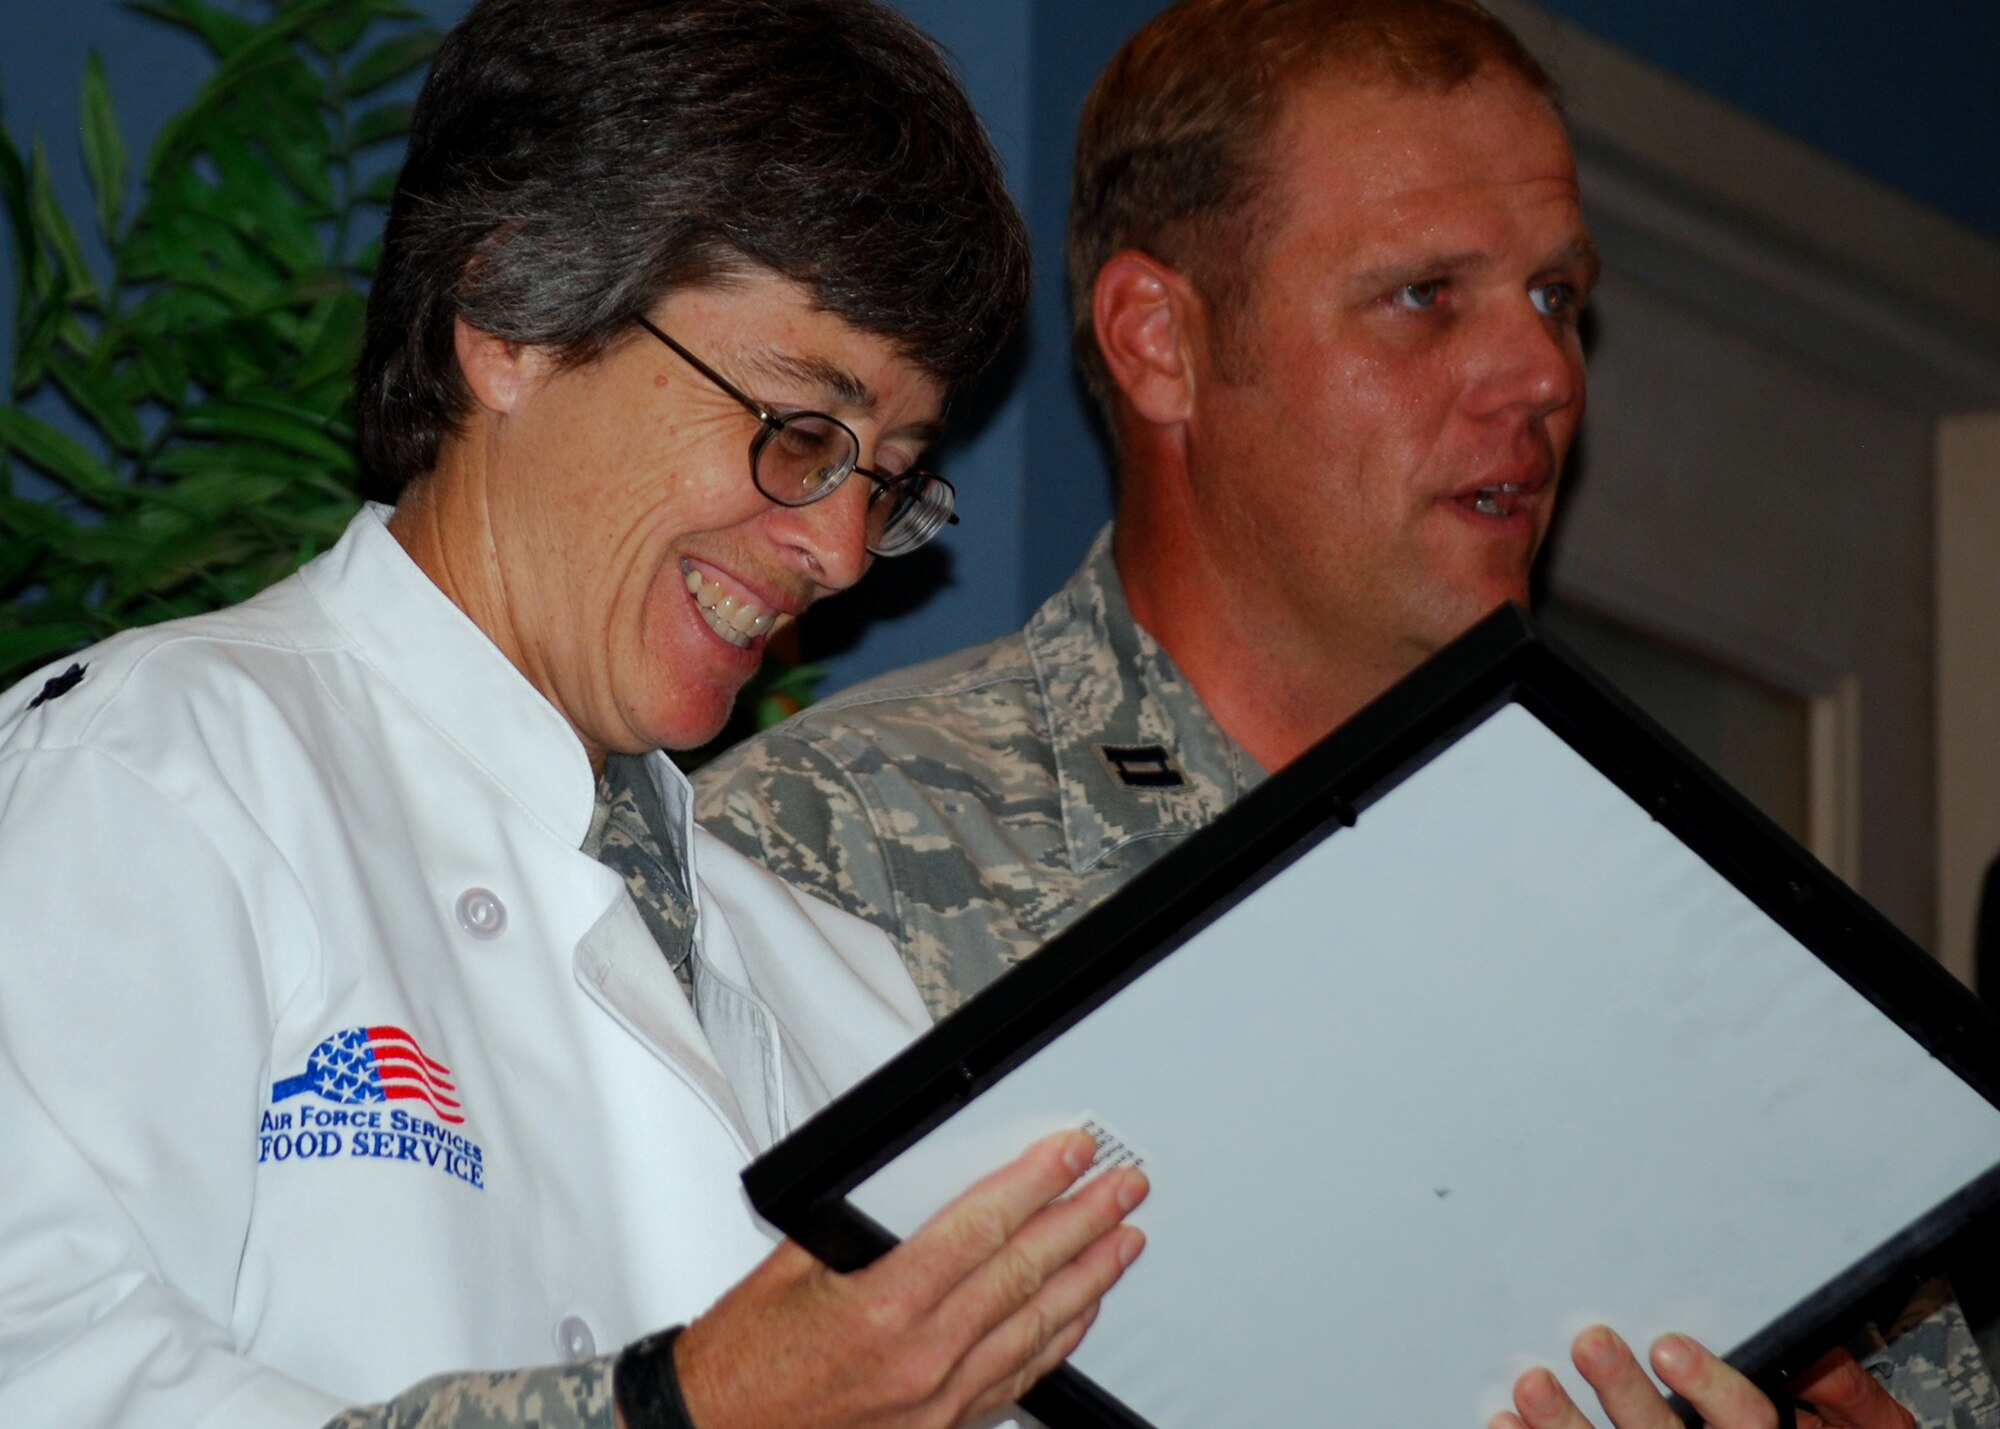 Lt. Col. Patricia Brewer, 919th Mission Support Group, admires a plaque presented to her by Capt. Michael McGee on behalf of the 919th Security Forces Squadron. The 919th Special Operations Wing held a going-away ceremony for her during the August unit training assembly. Colonel Brewer moves on to Beale AFB, Calif. in September. (U.S. Air Force photo/Tech. Sgt. Cheryl Foster)
